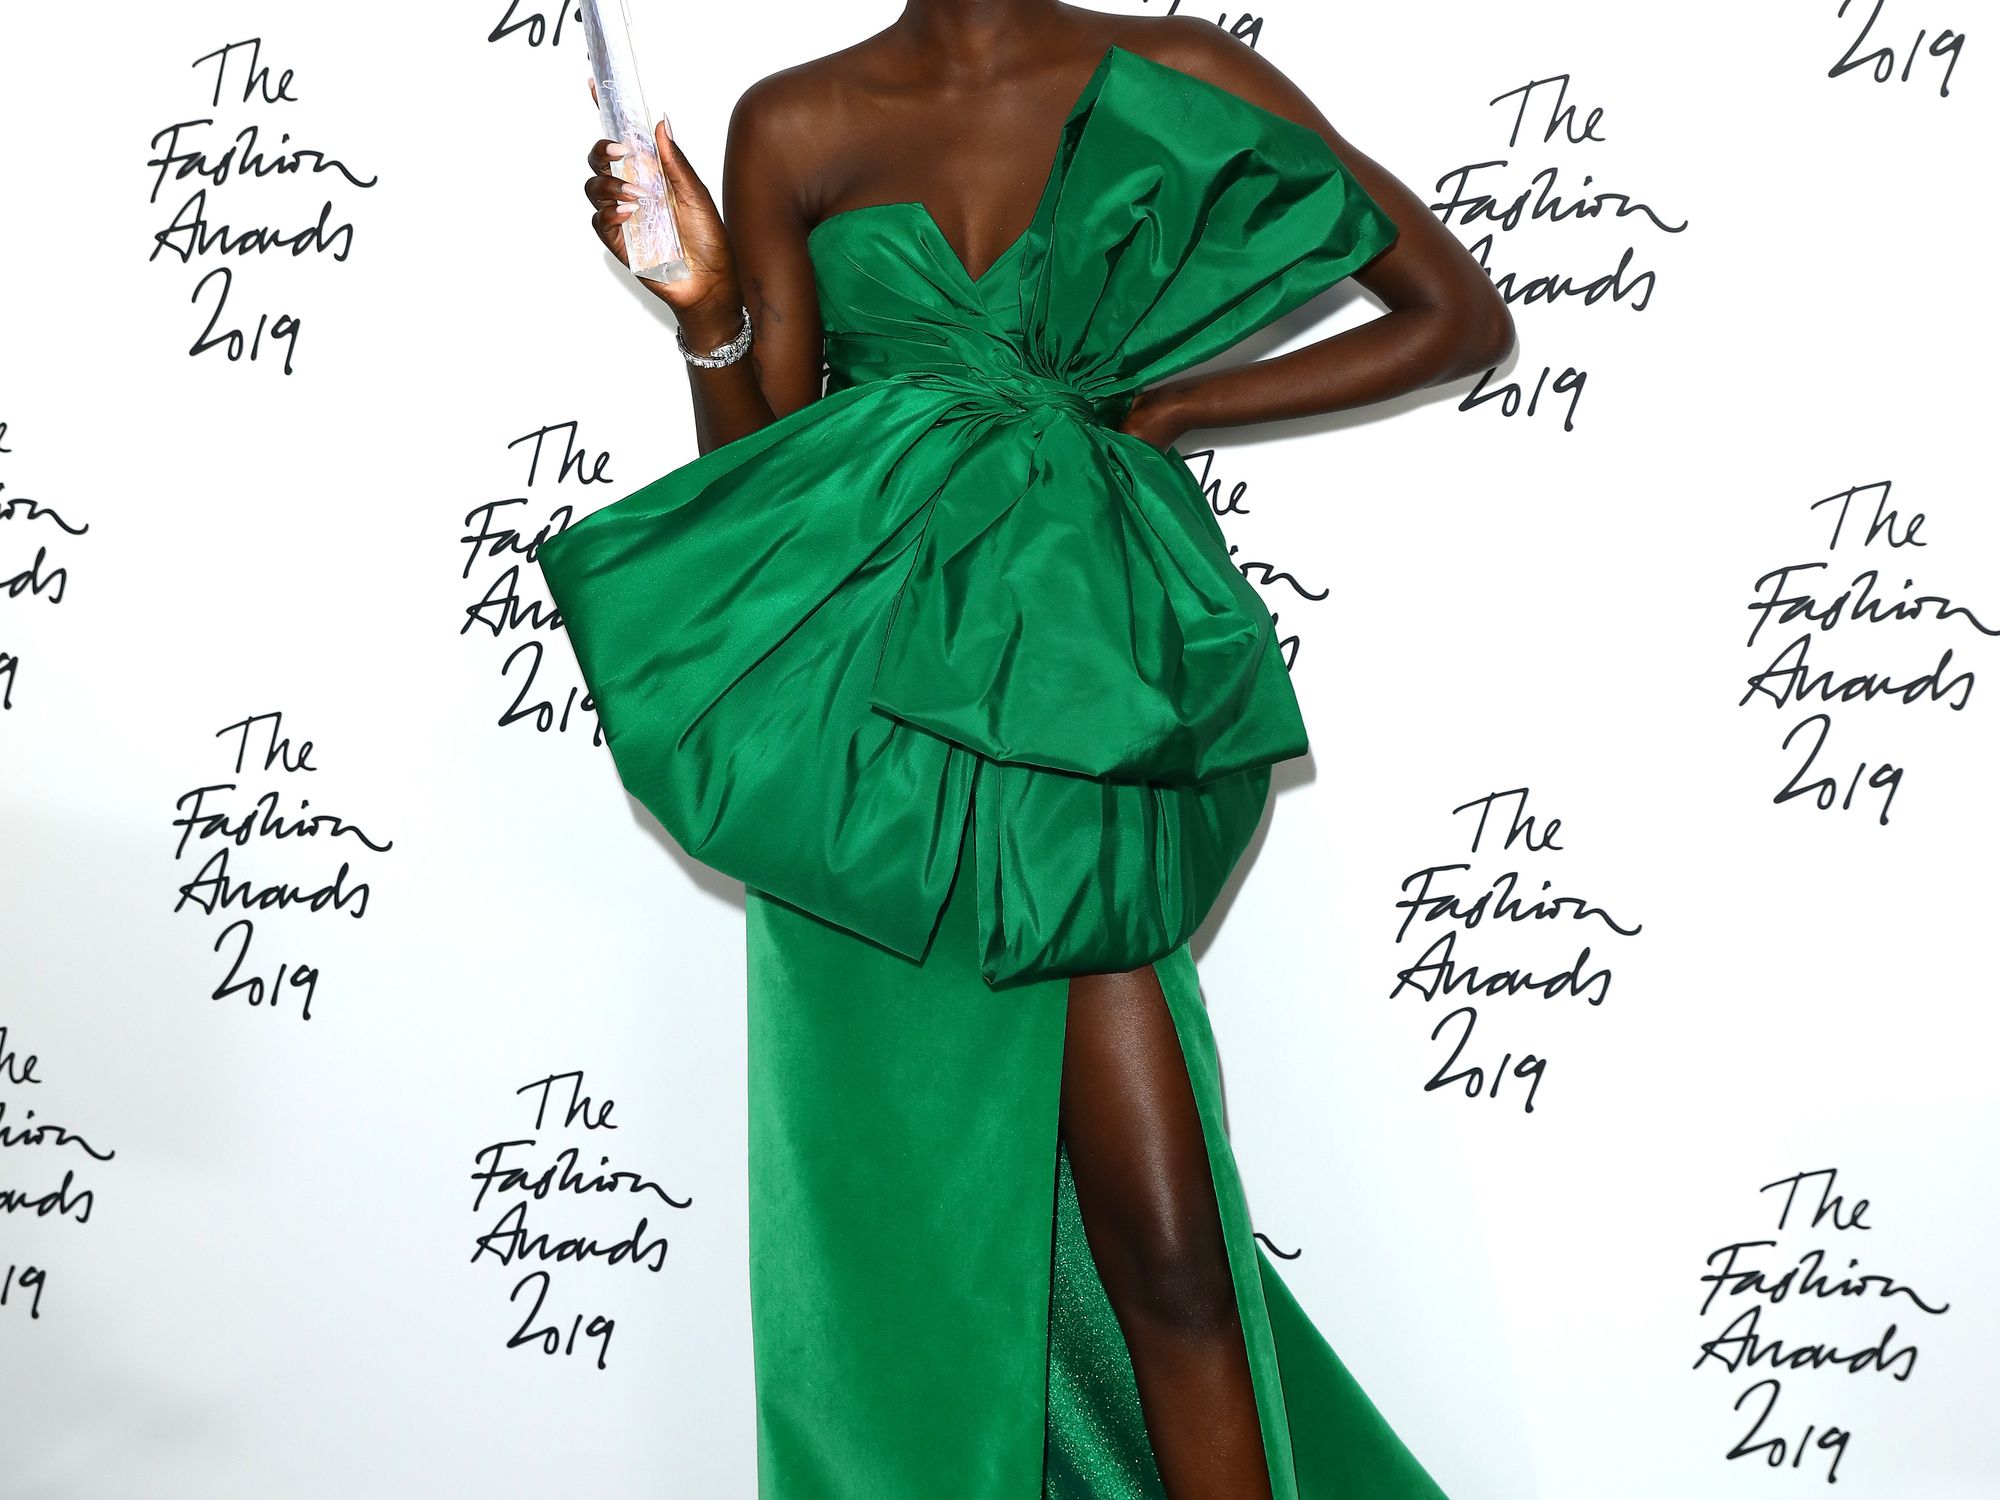 South Sudanese Model Adut Akech Wins Model of the Year at 2019 British Fashion Awards